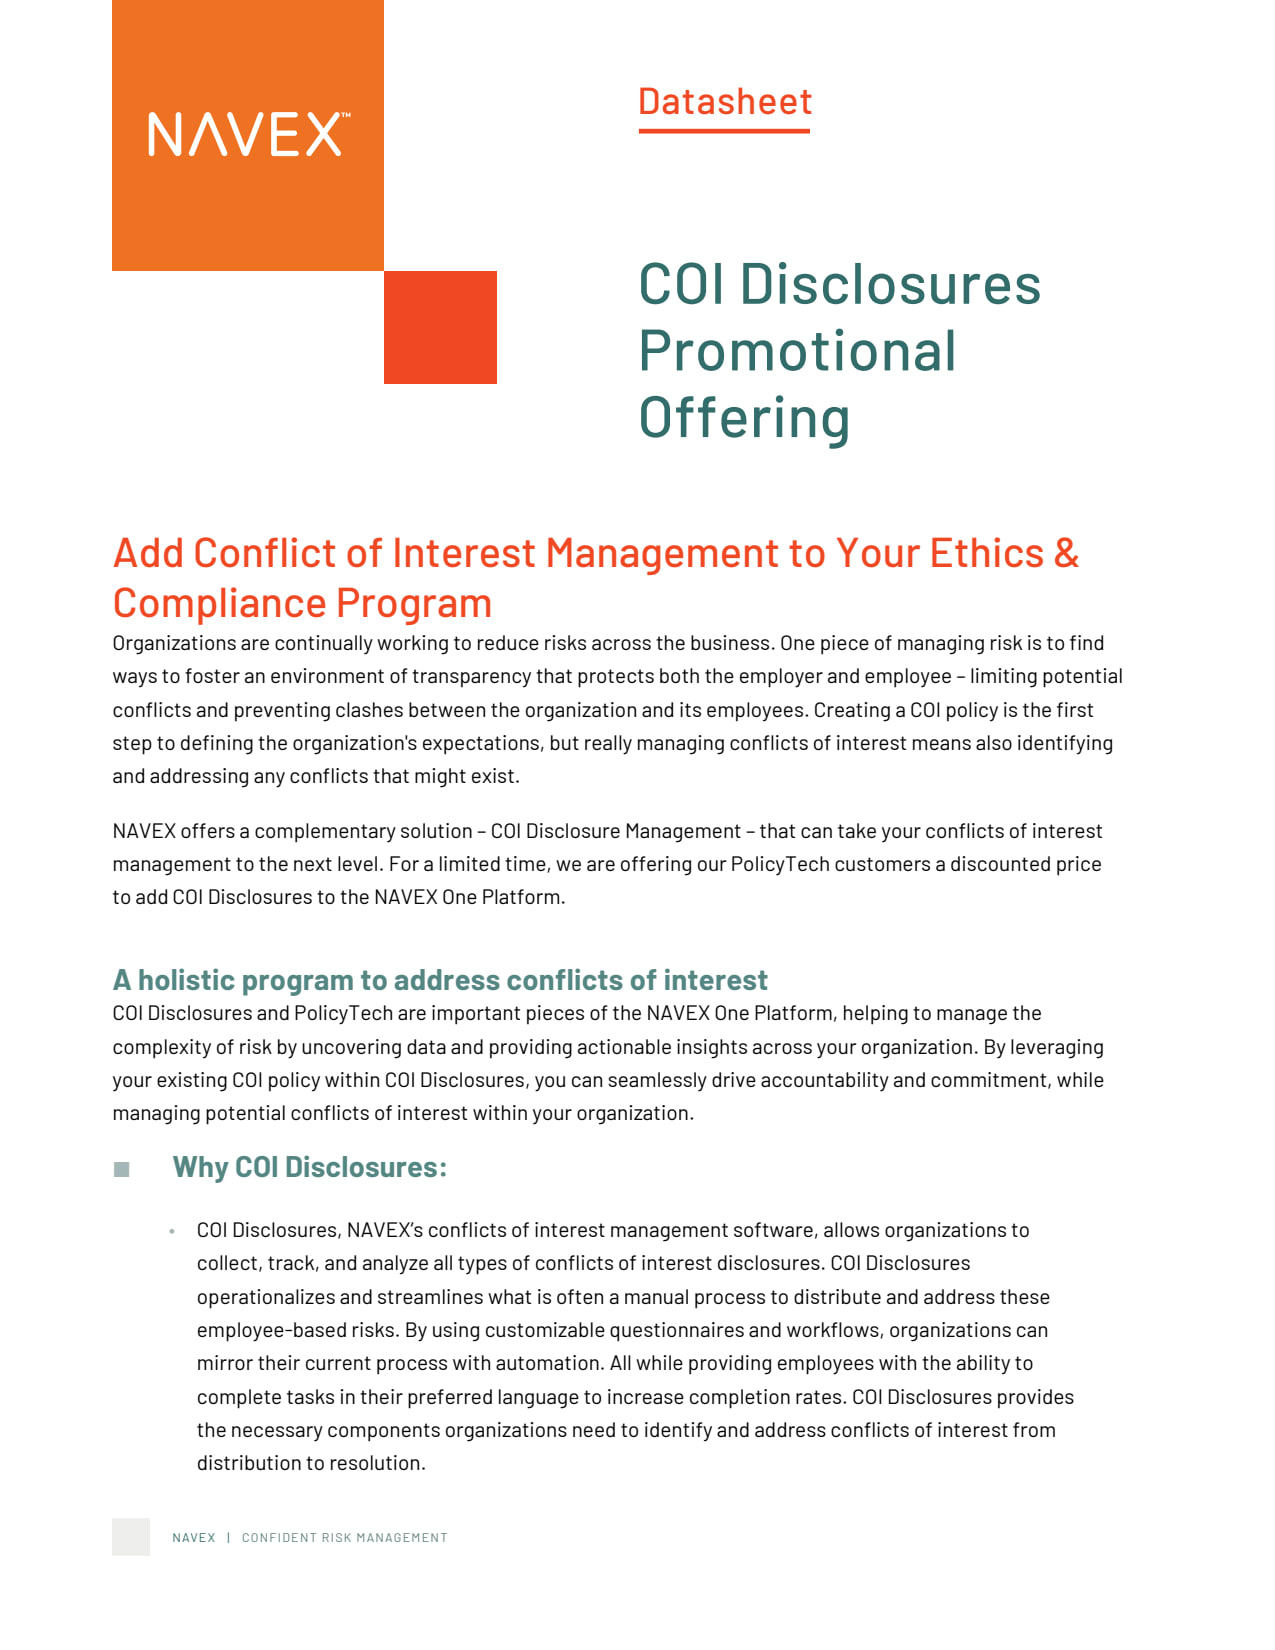 NAVEX COI Disclosures Promotional Offering